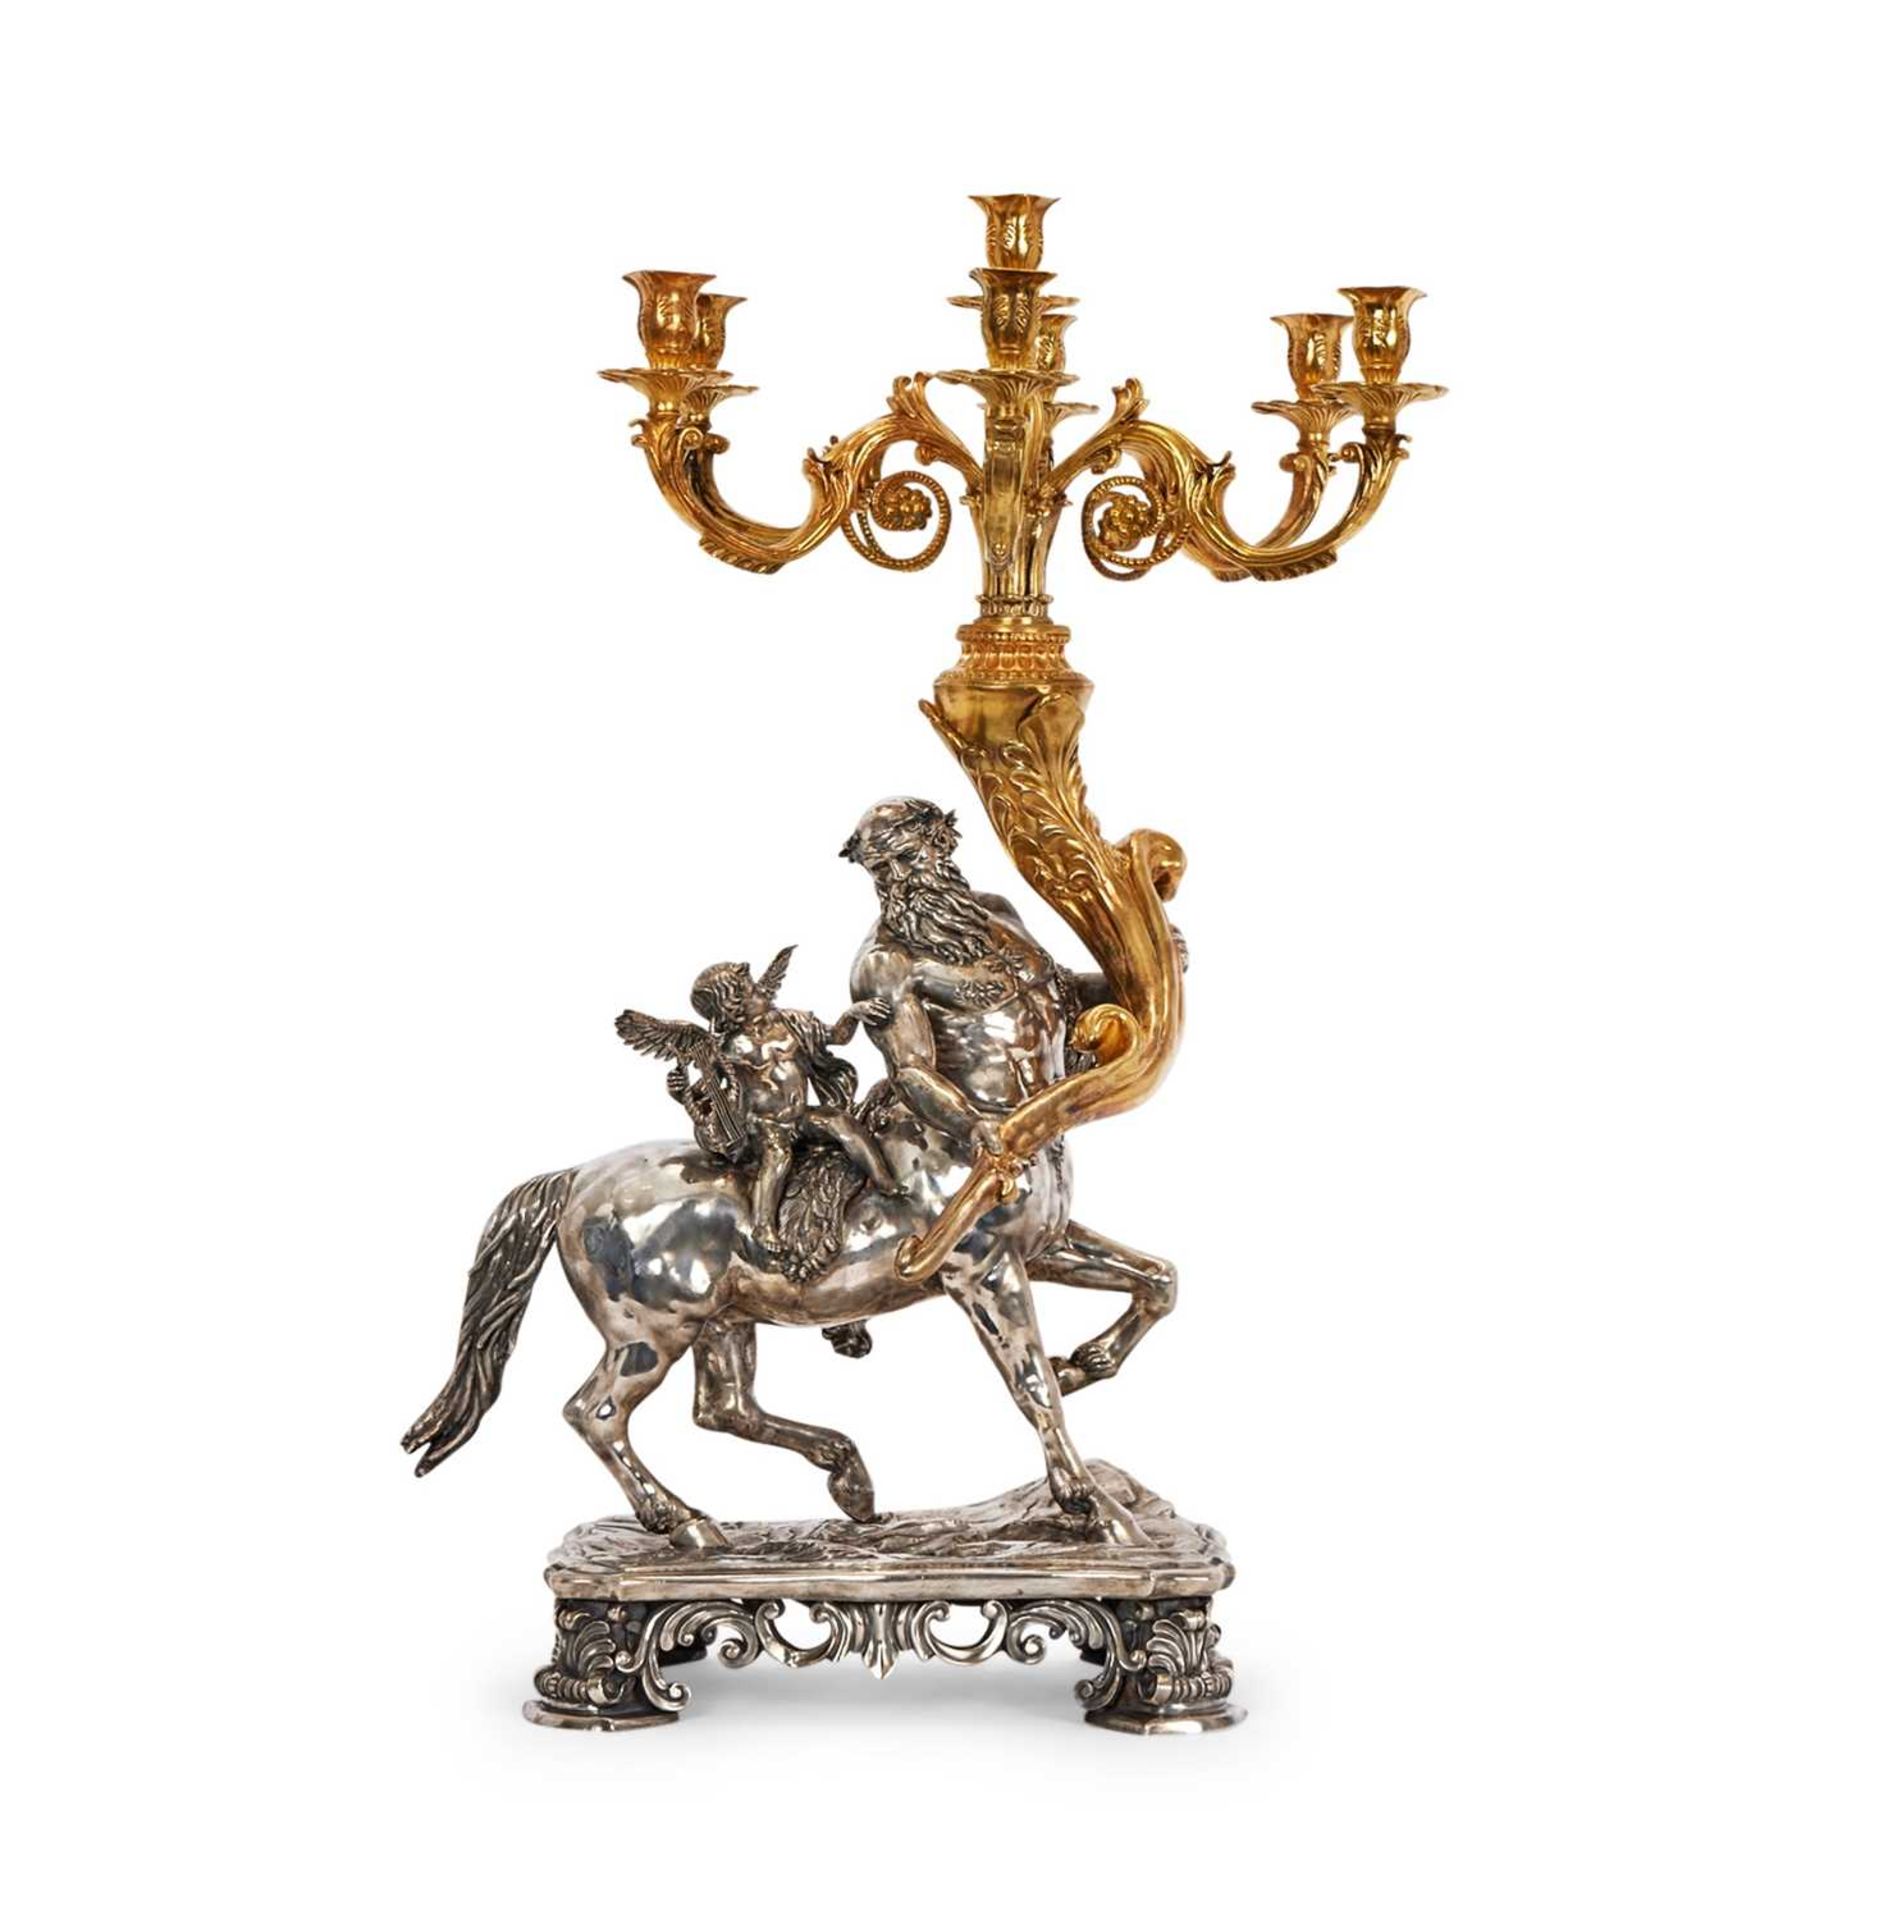 A MASSIVE PAIR OF SILVER AND SILVER GILT ITALIAN BAROQUE STYLE CANDELABRA - Image 8 of 9